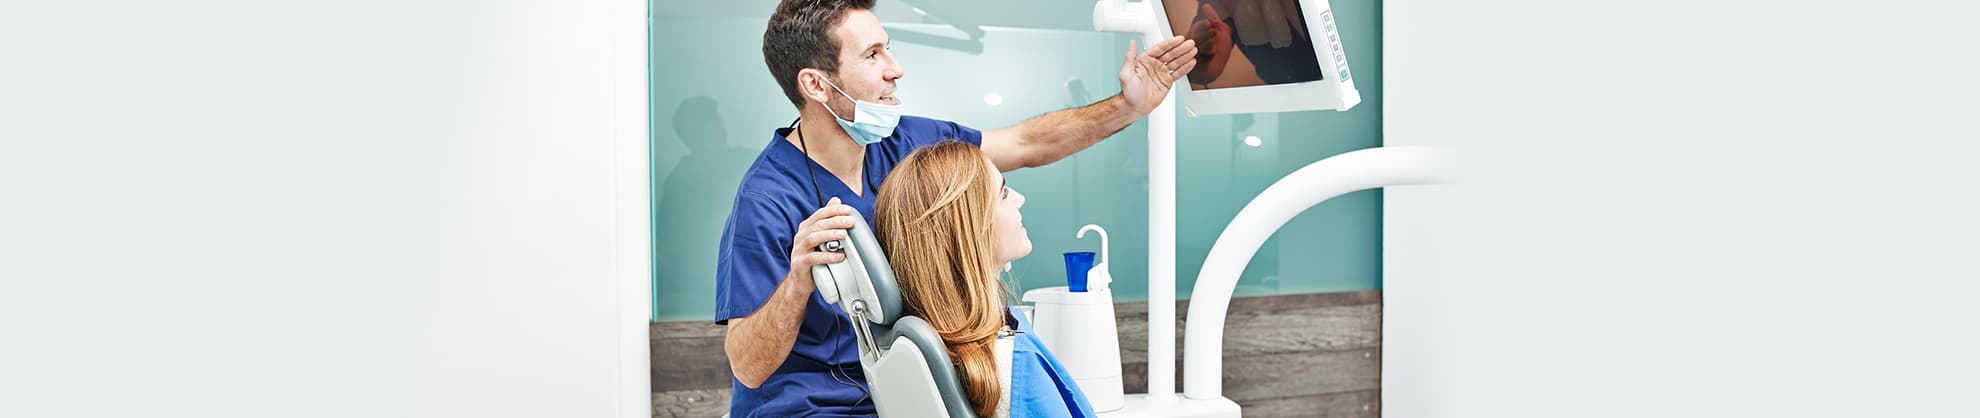 Teeth Extraction Services